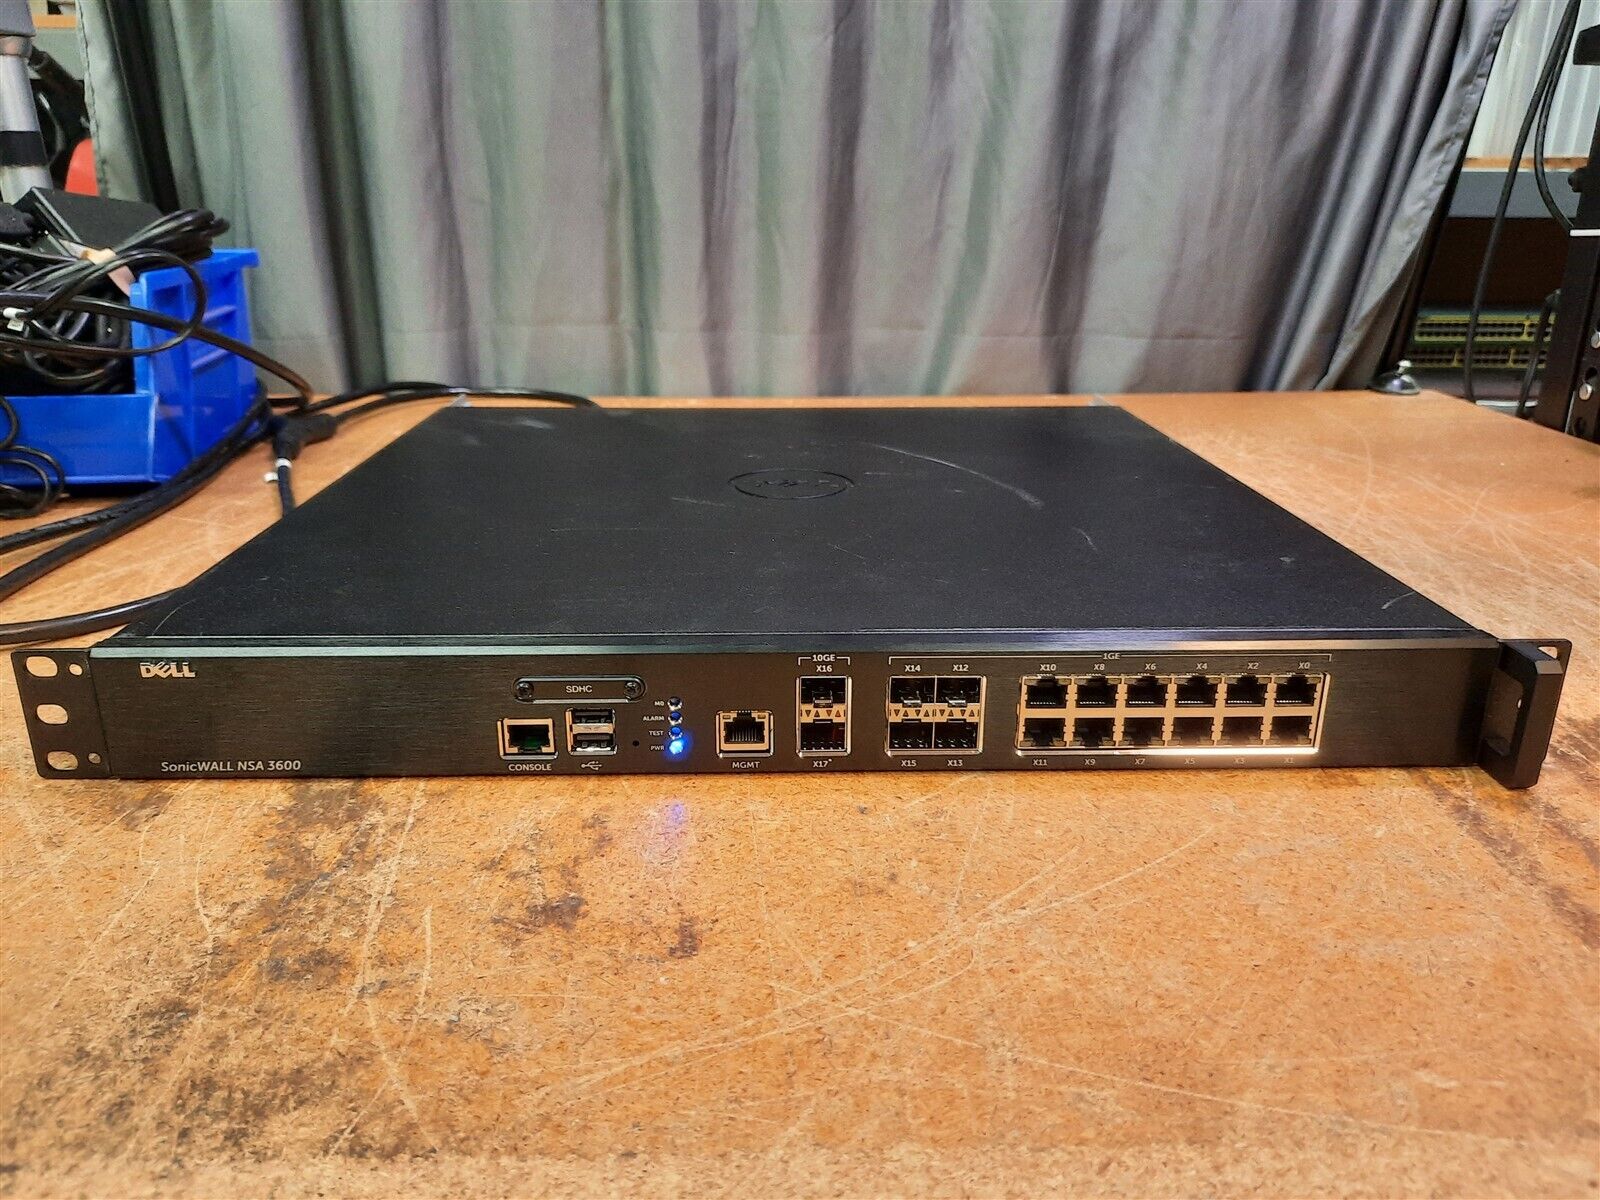 Dell SonicWall 1RK26-0A2 Firewall Device Security Appliance NSA 3600, with rails